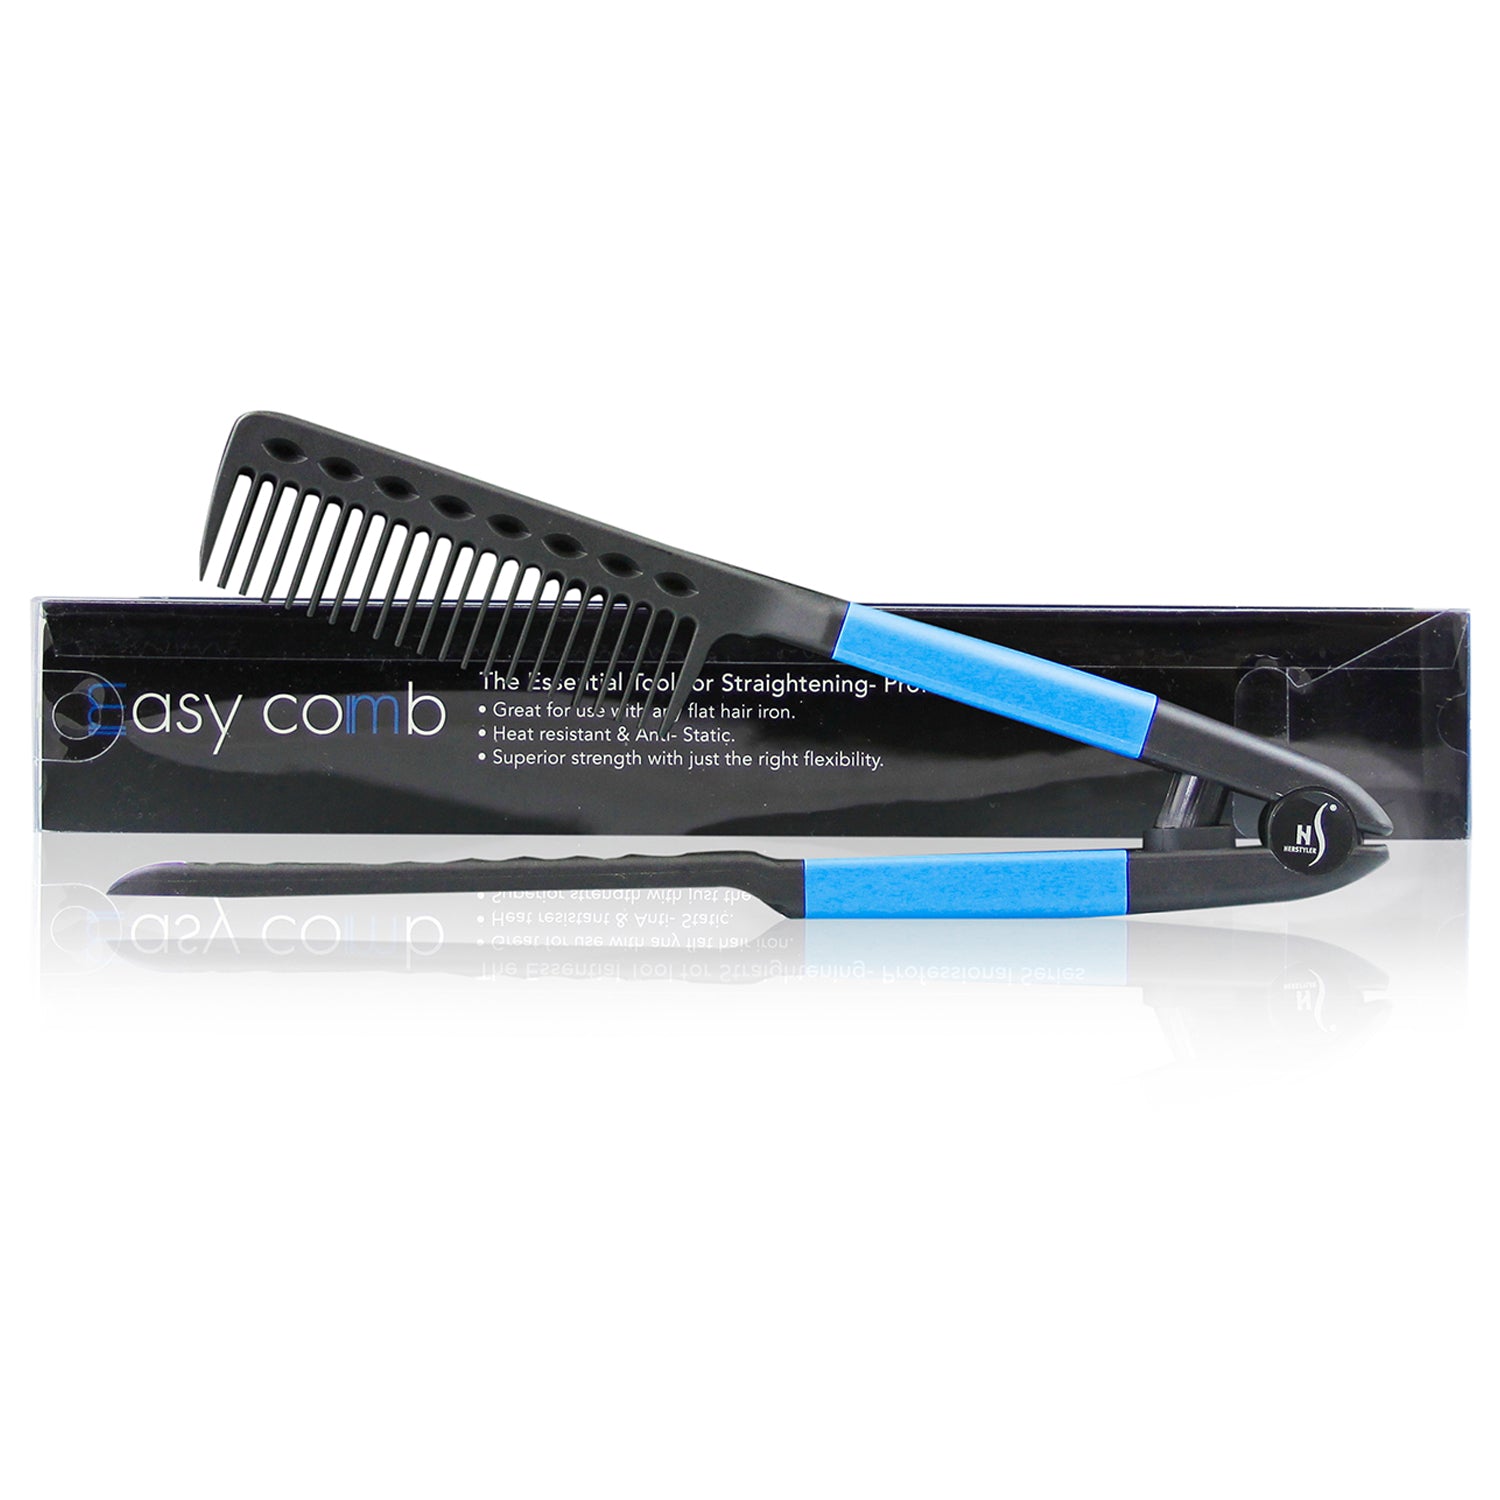 herstyler straightening comb for hair blue